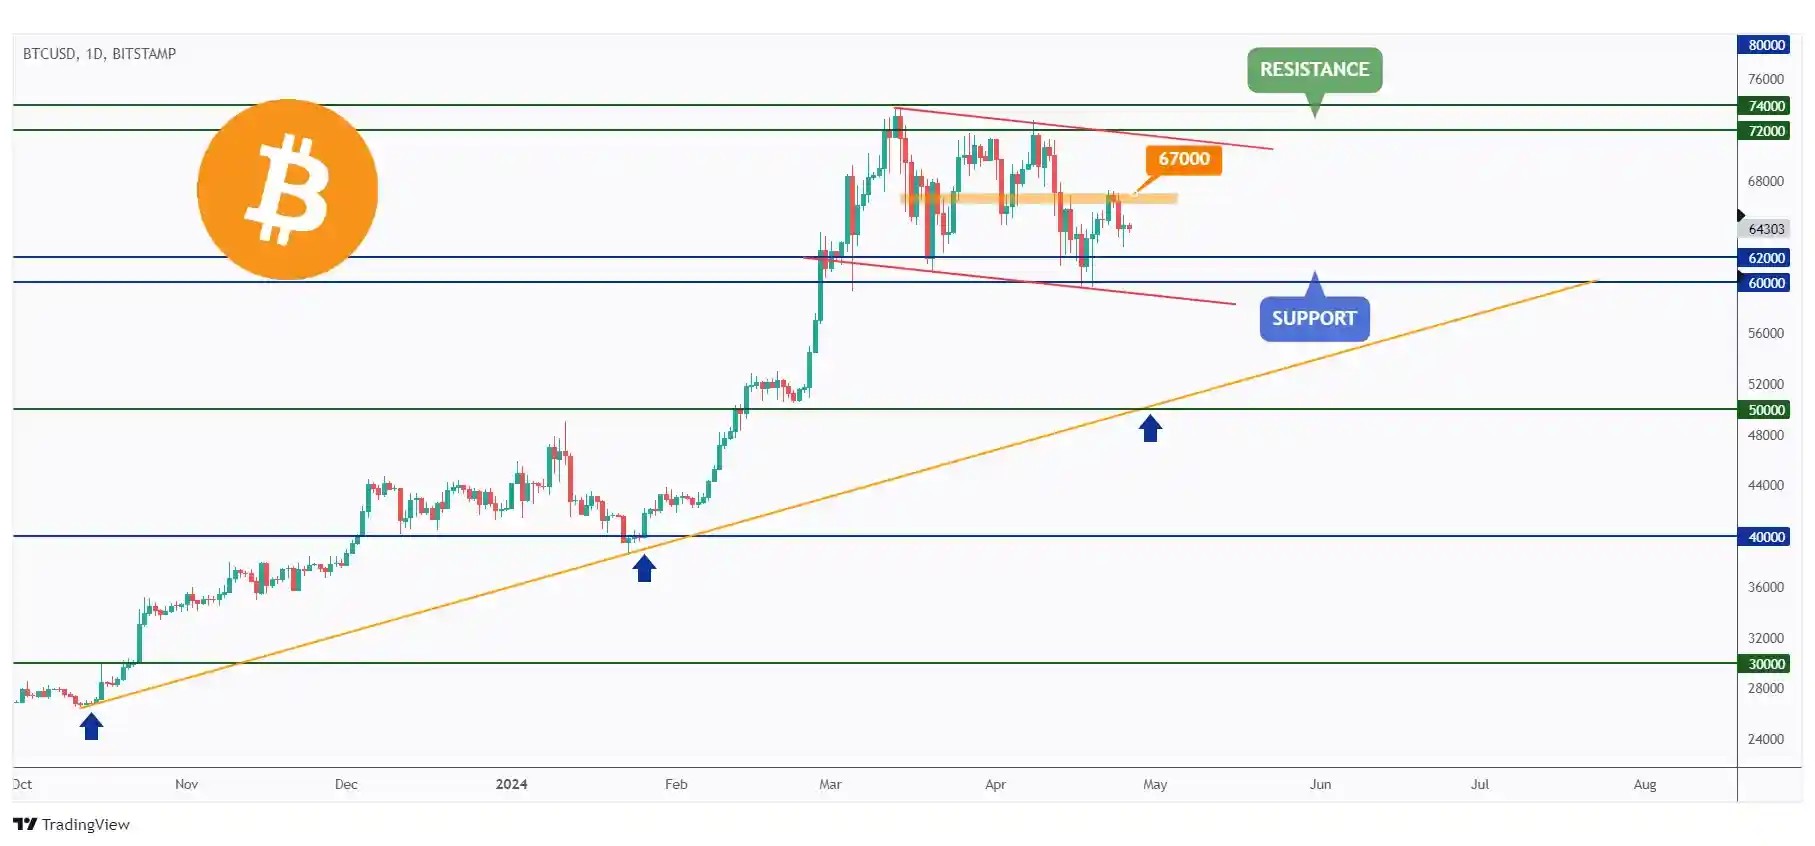 BTC daily chart rejecting the $62,000 support and showing the last major high at $67,000 that we need a break above for the bulls to take over.